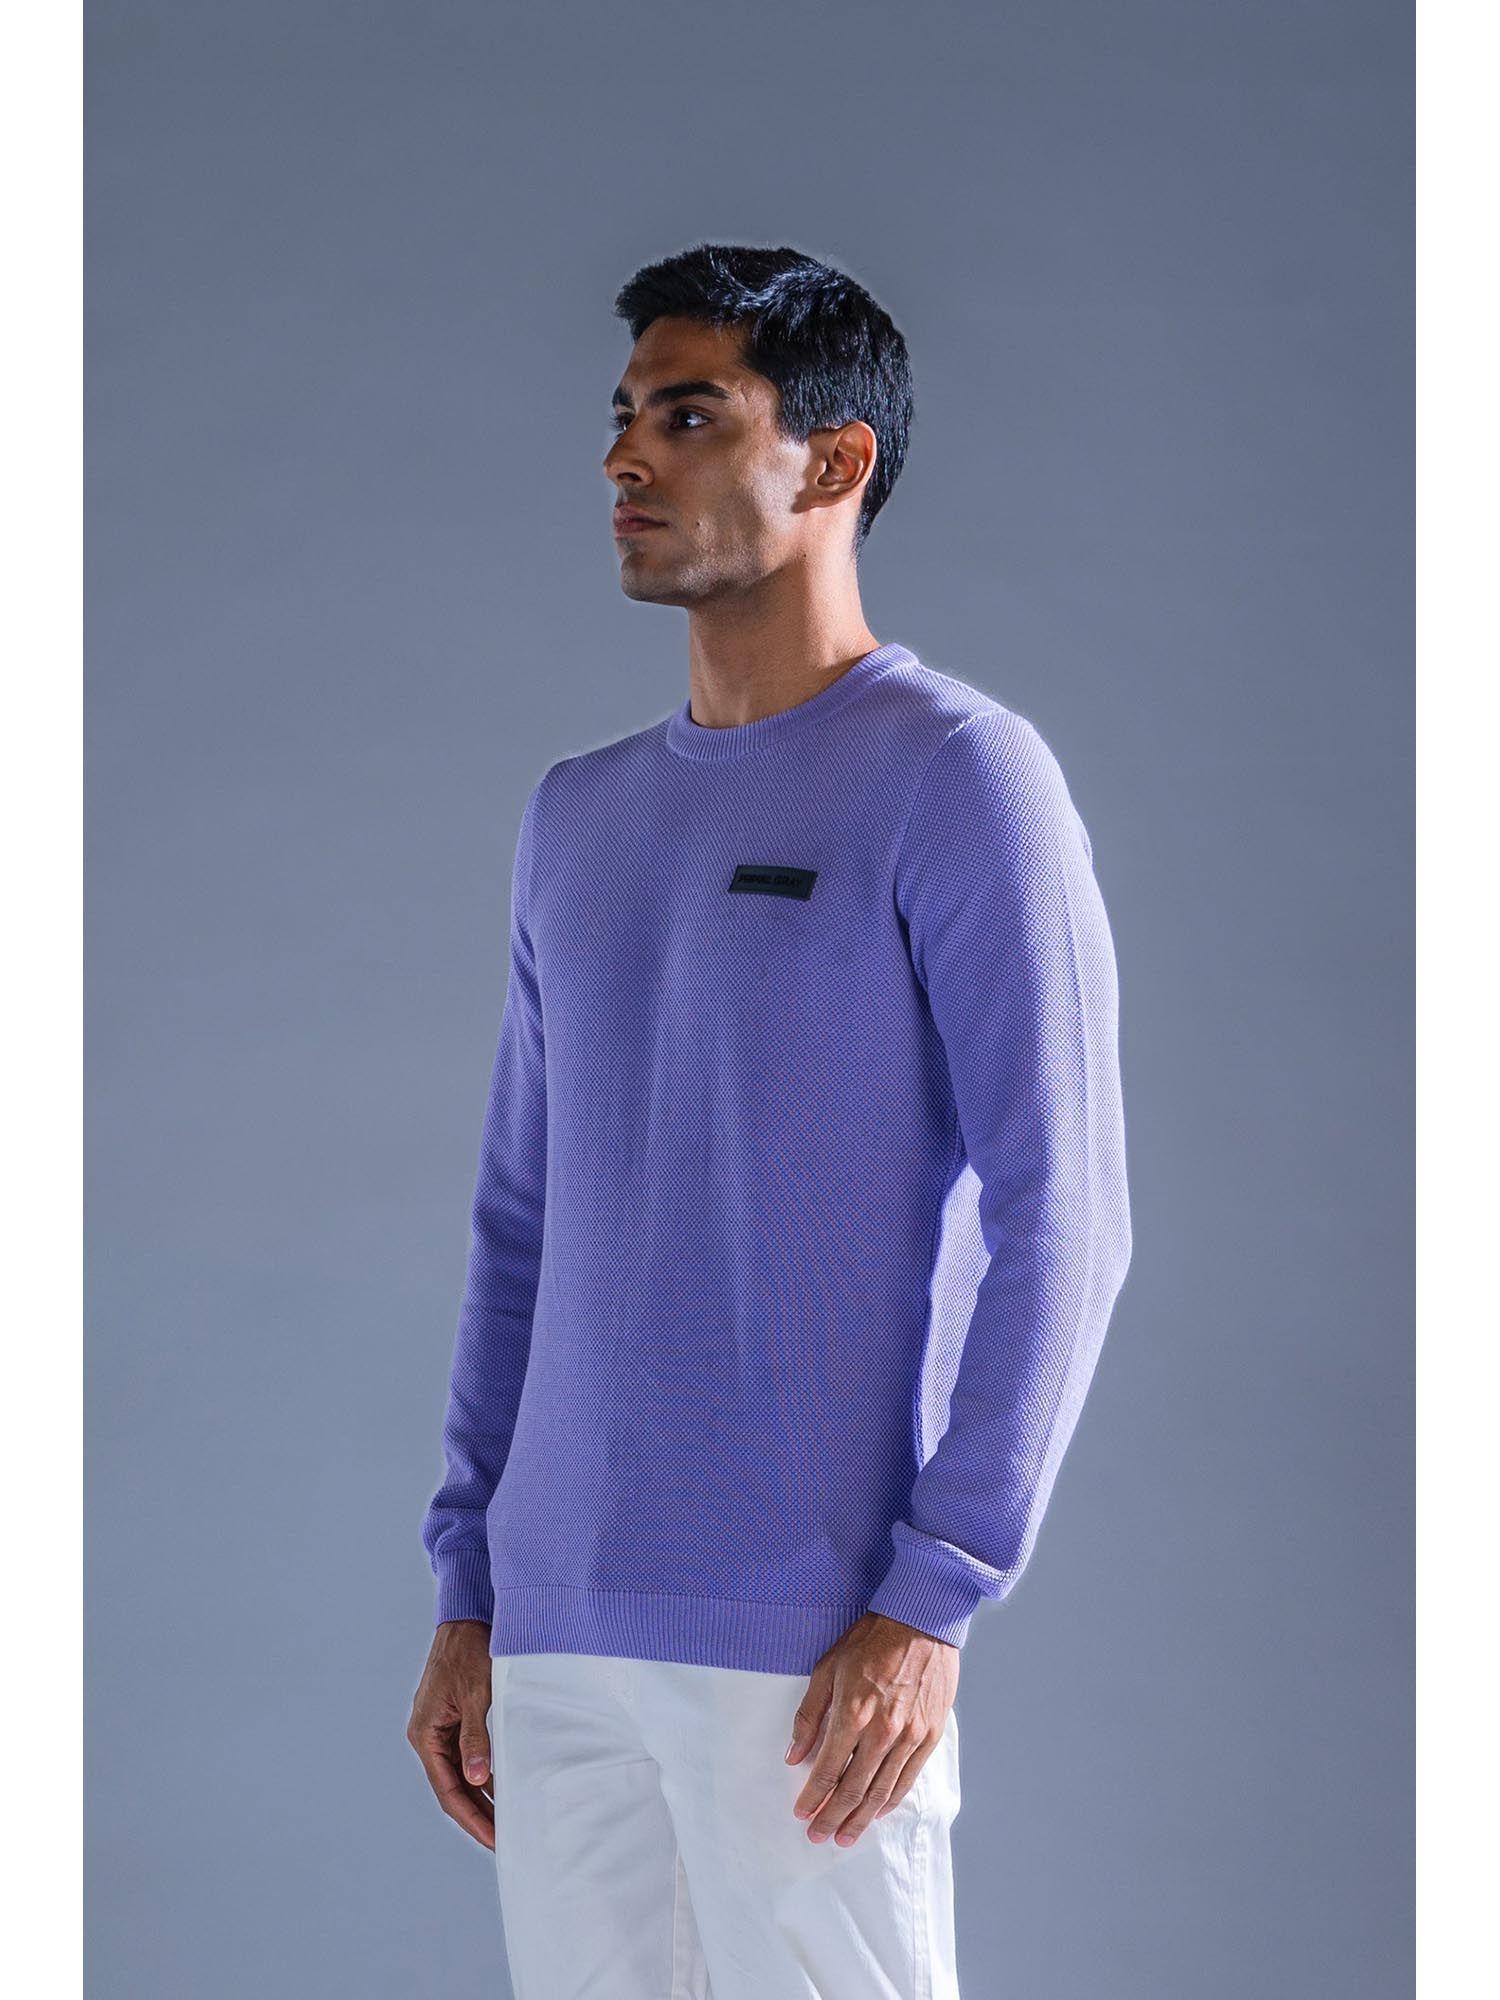 lavender cotton knit sweater classic sweater